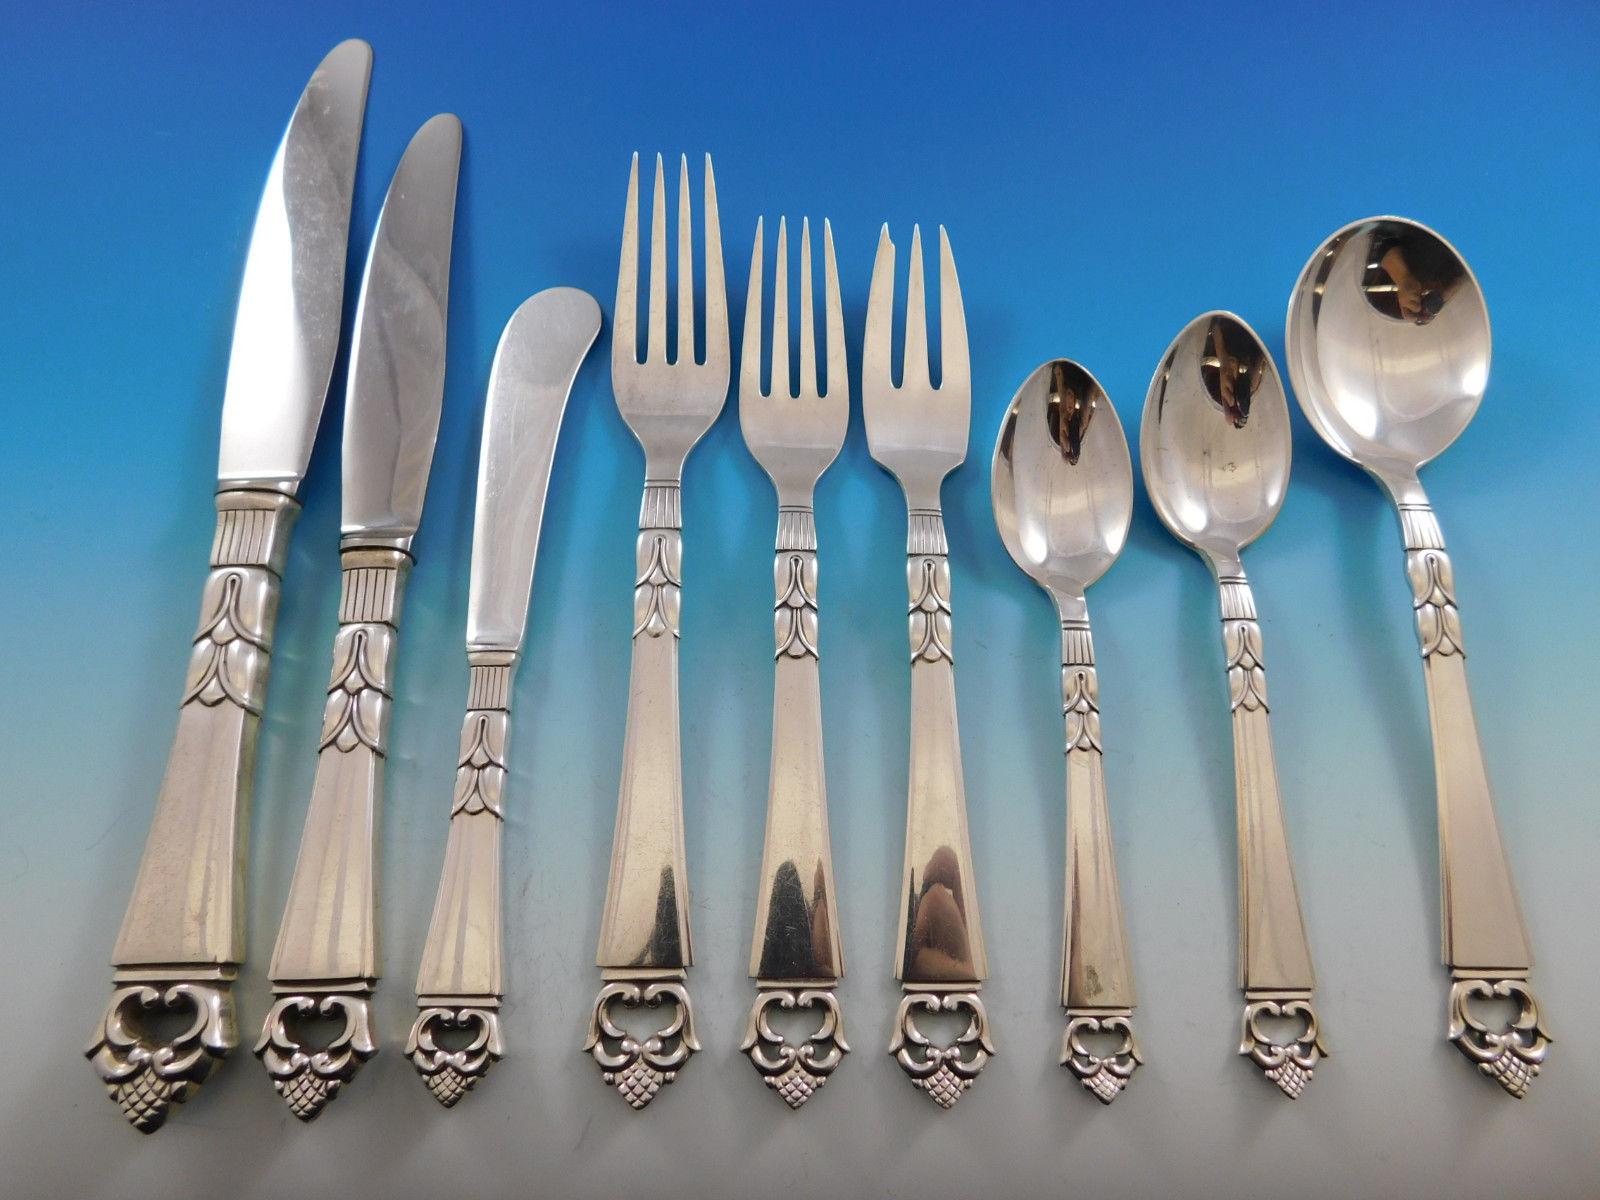 Monumental dinner and Luncheon size Danish crown by Frigast, Copenhagen, Denmark sterling silver flatware set, 79 pieces. This set includes:

Eight dinner size knives, 9 1/2